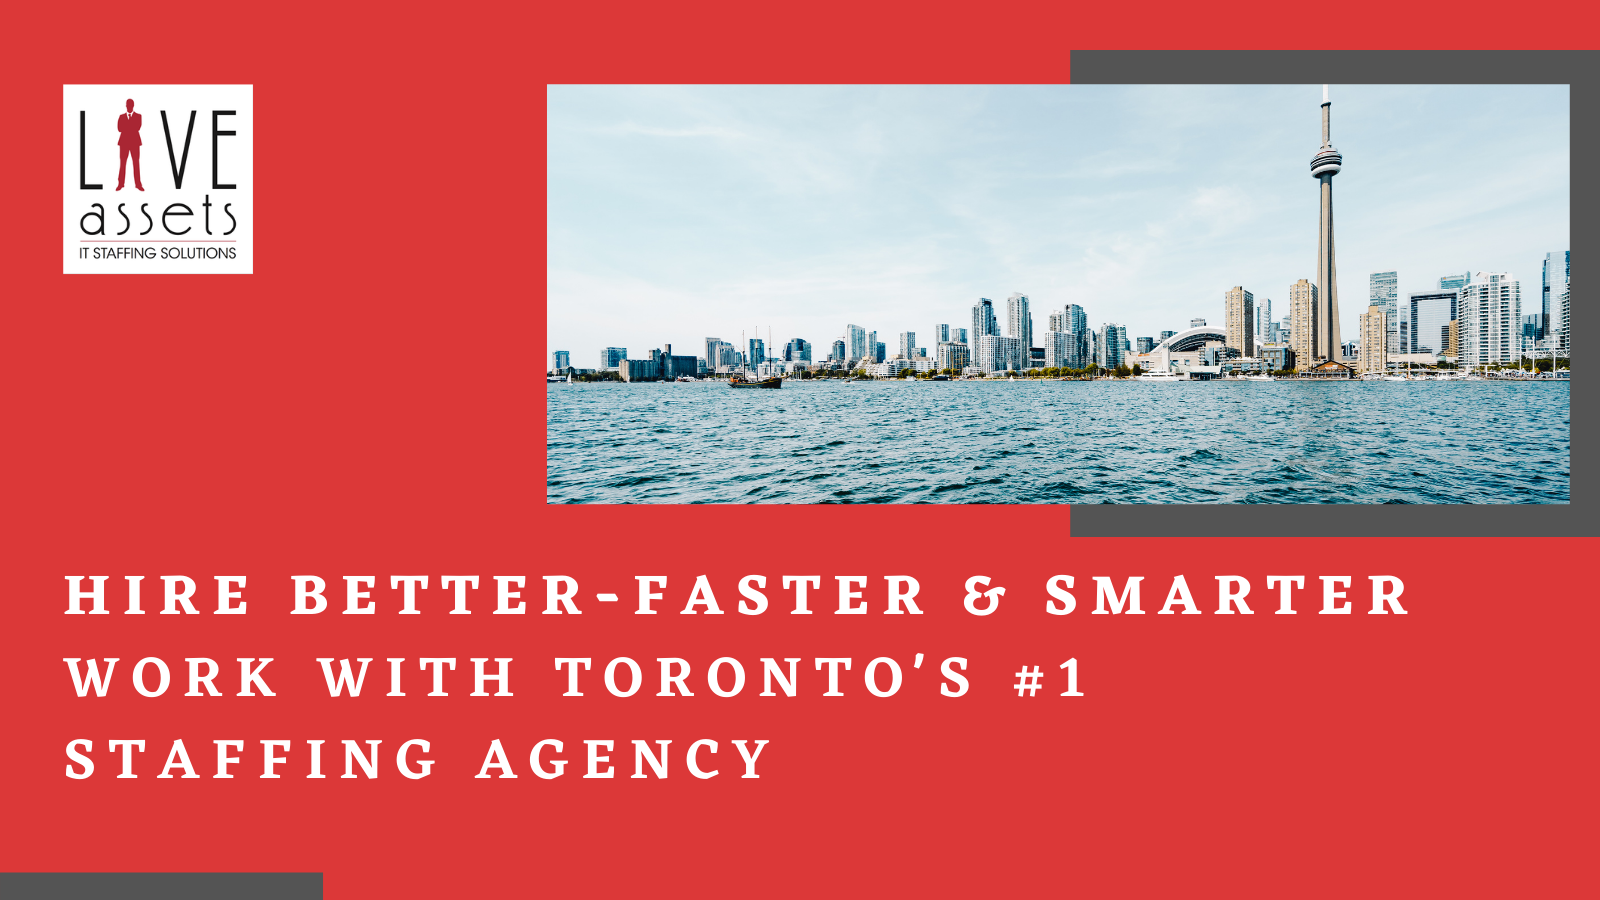 The Best Recruitment Agency in Toronto - Live Assets